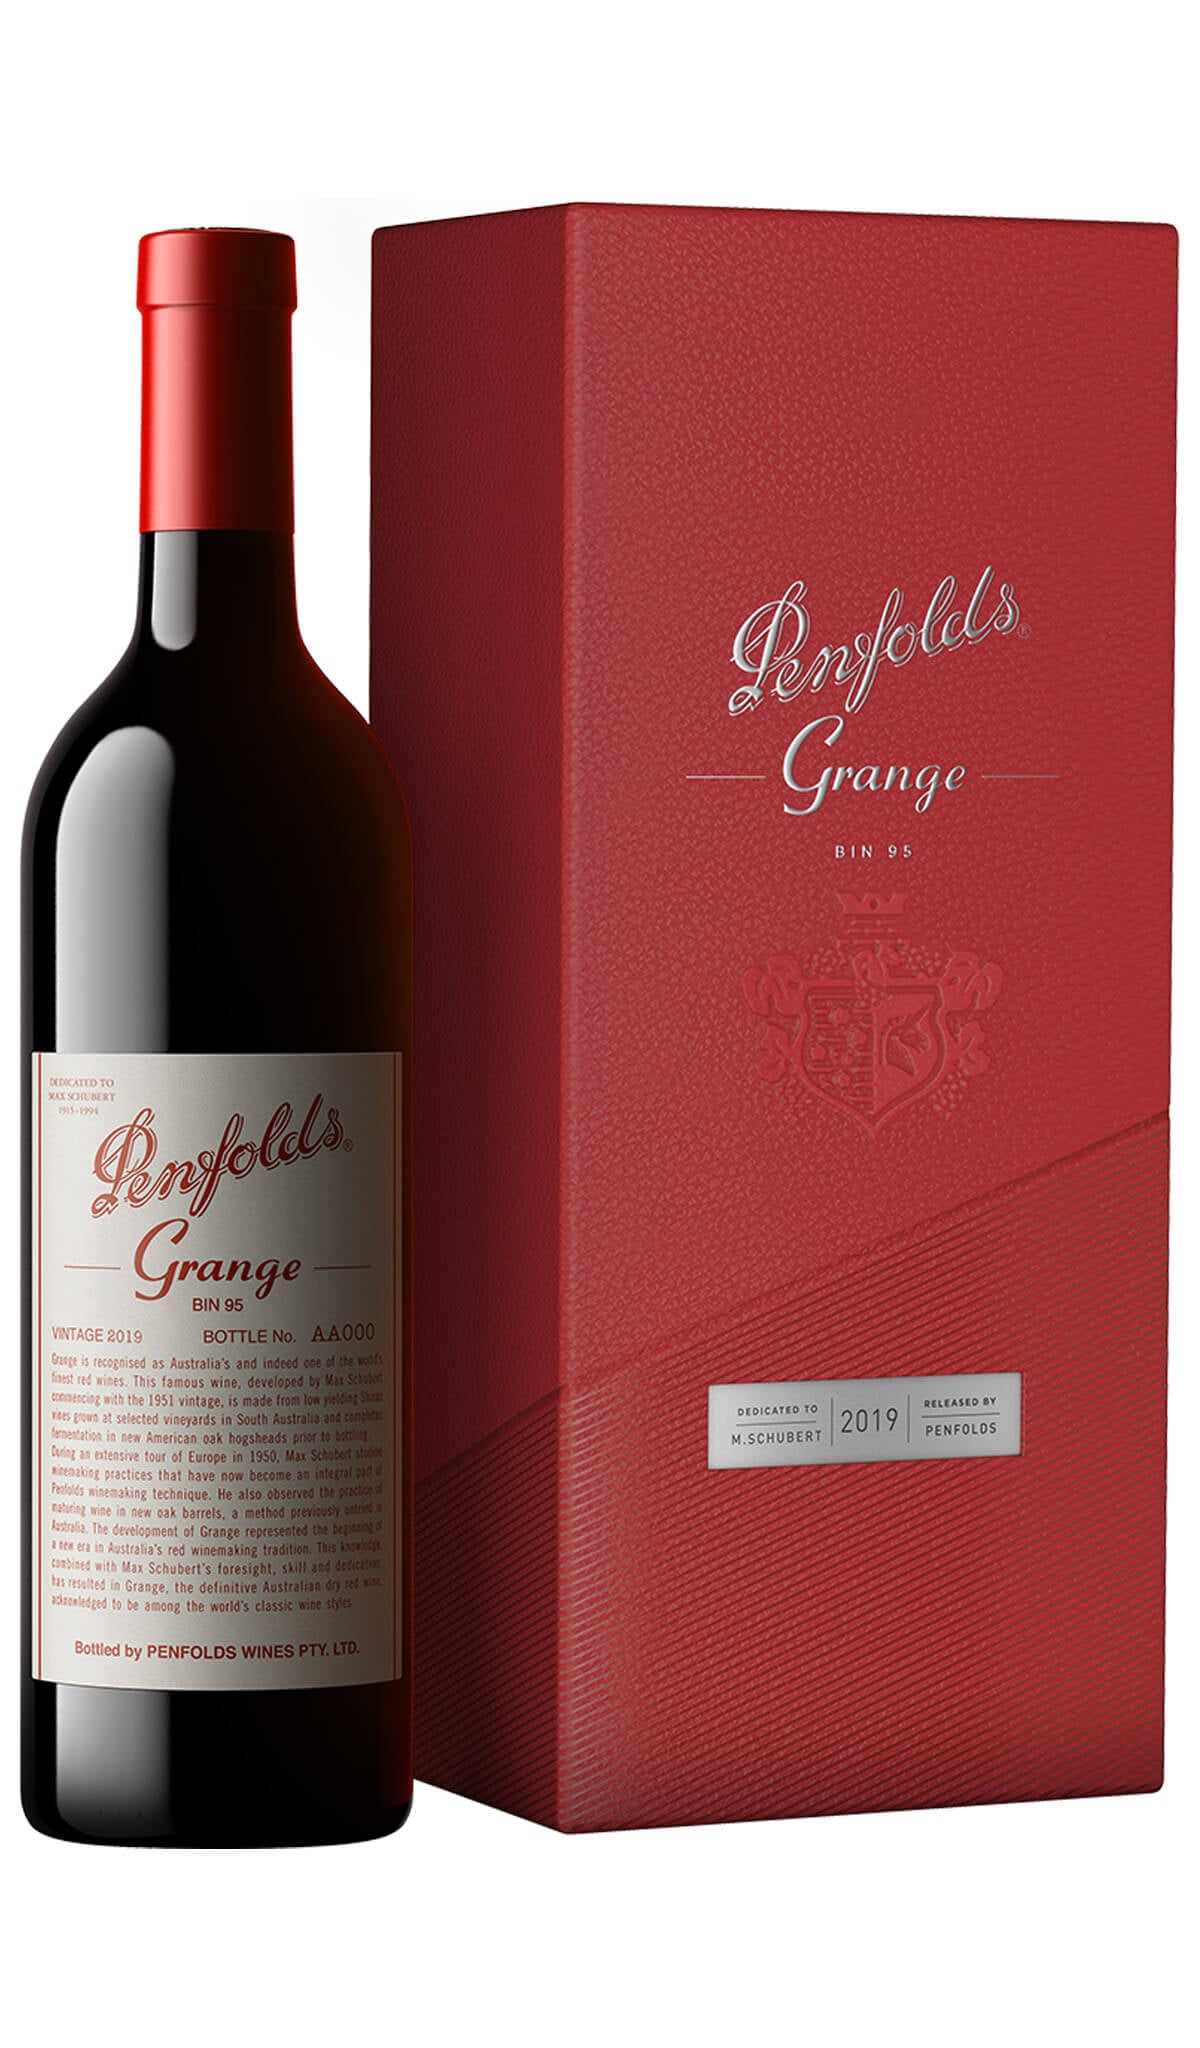 Find out more or purchase Penfolds Grange 2019 vintage available online at Wine Sellers Direct - Australia's independent liquor specialists.